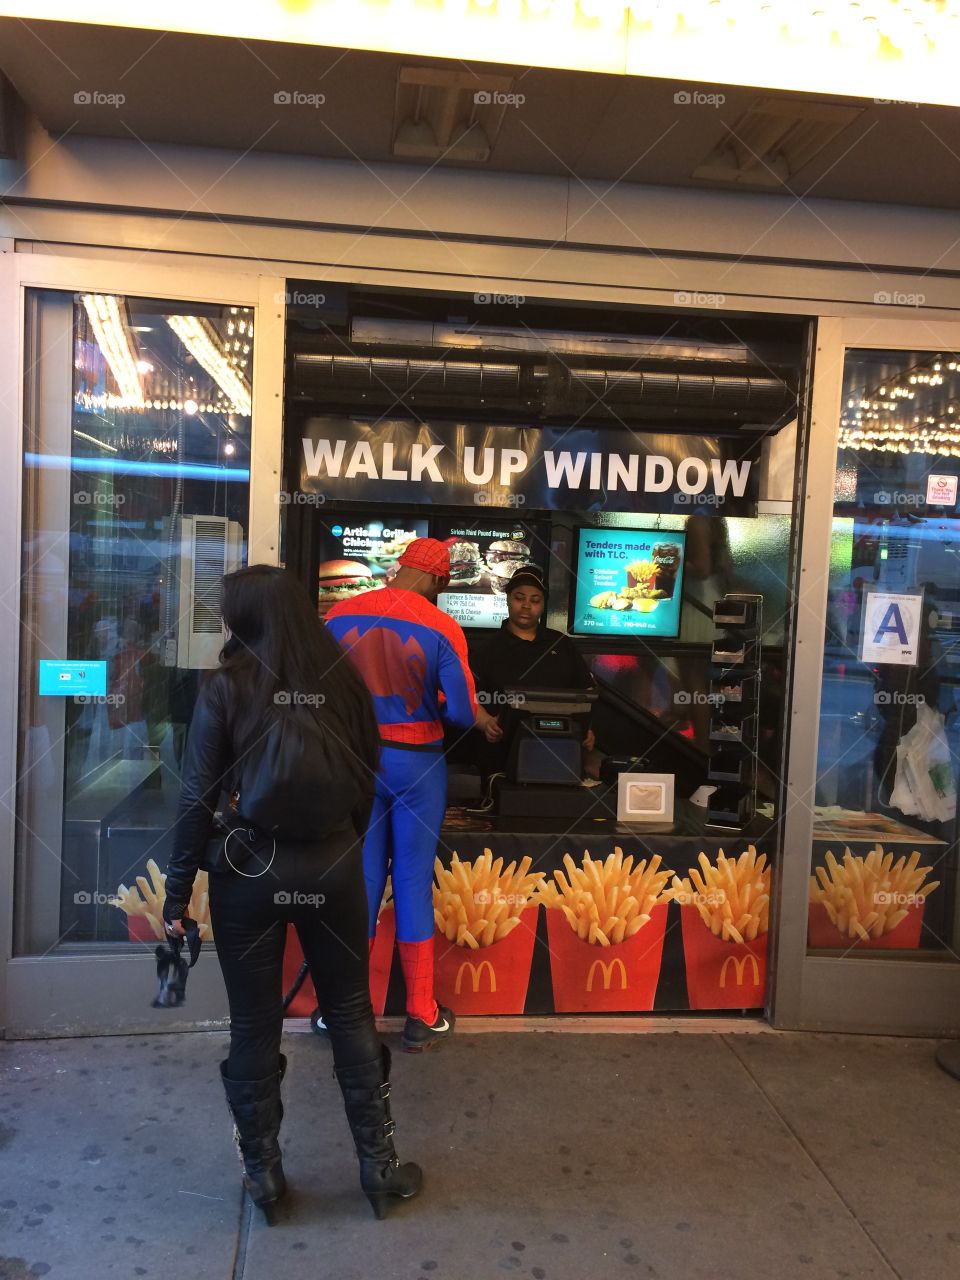 Spider-Man buying some fries. Spider-Man waiting on a McDonald's line in NYC